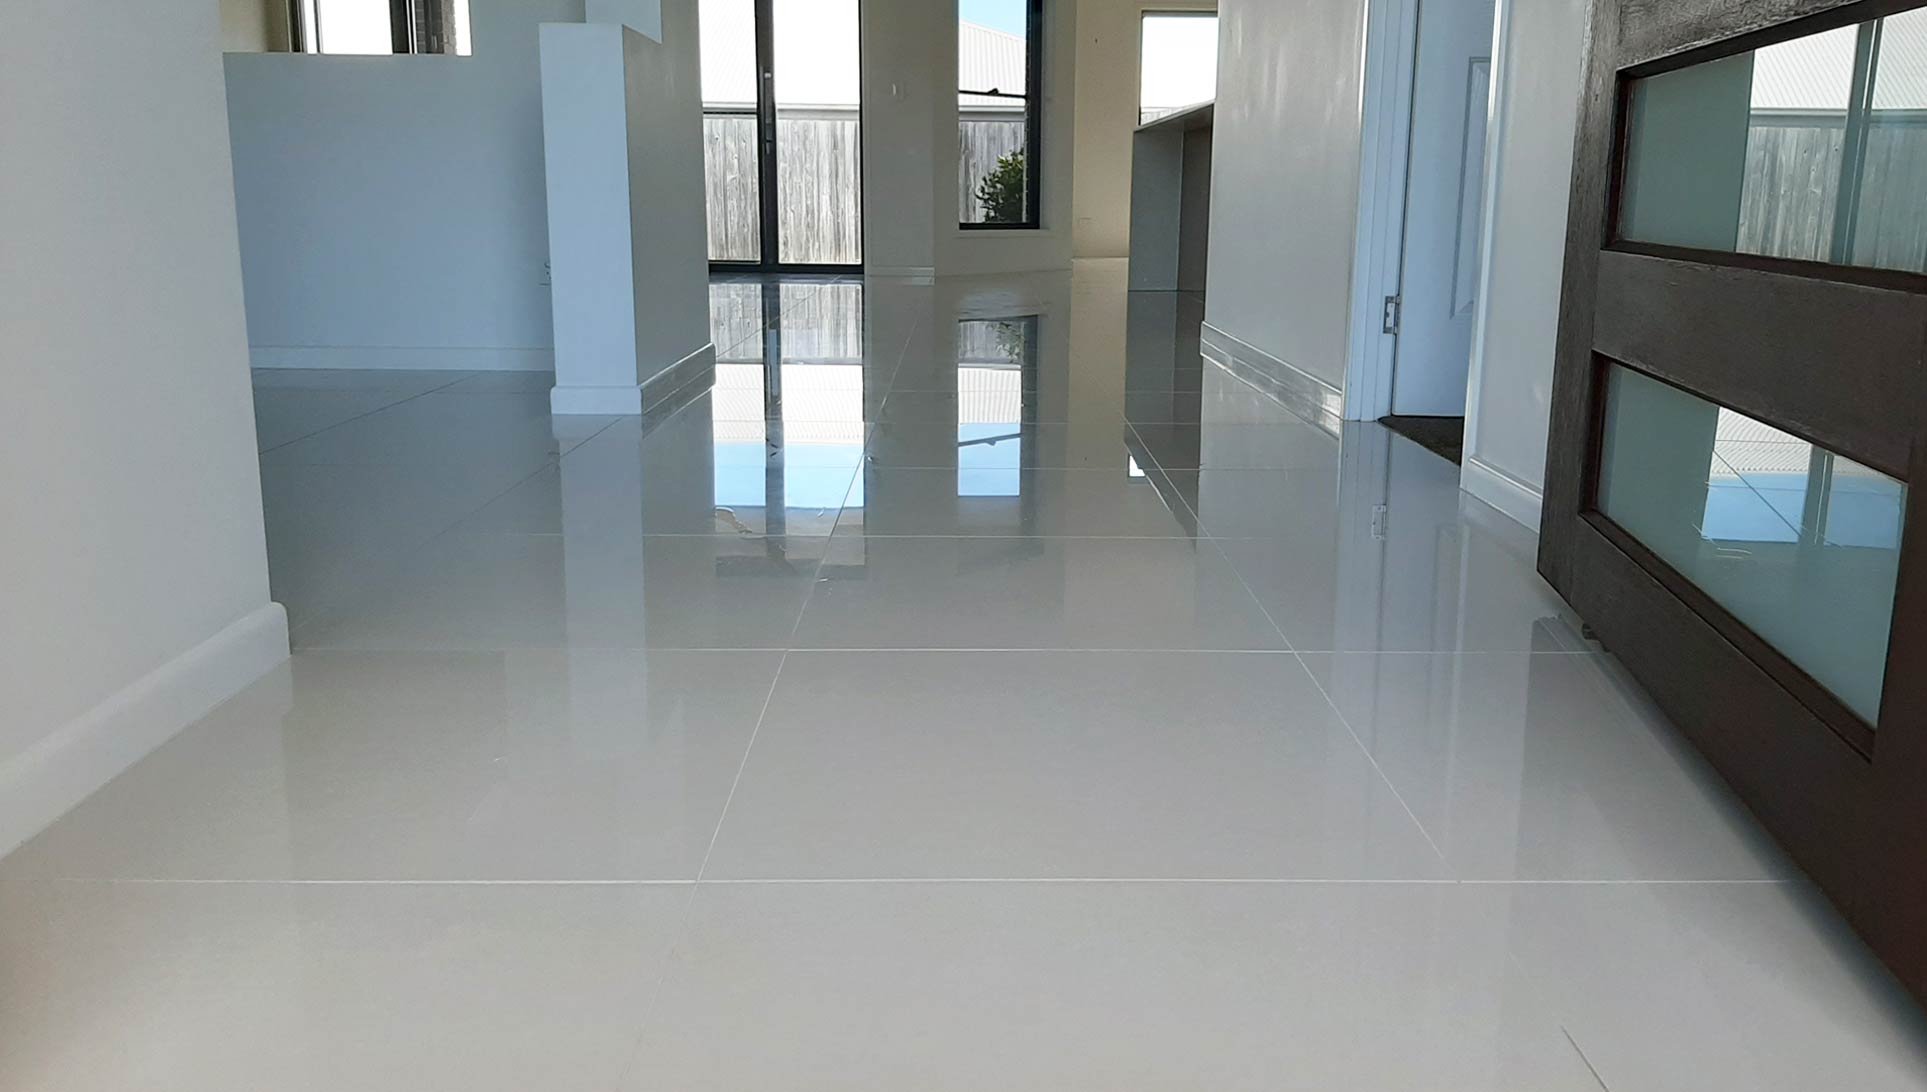 Tile Floor Cleaning Tweed Coast Casuarina NSW | Image of freshly cleaned tiles by Crikey Cleaner